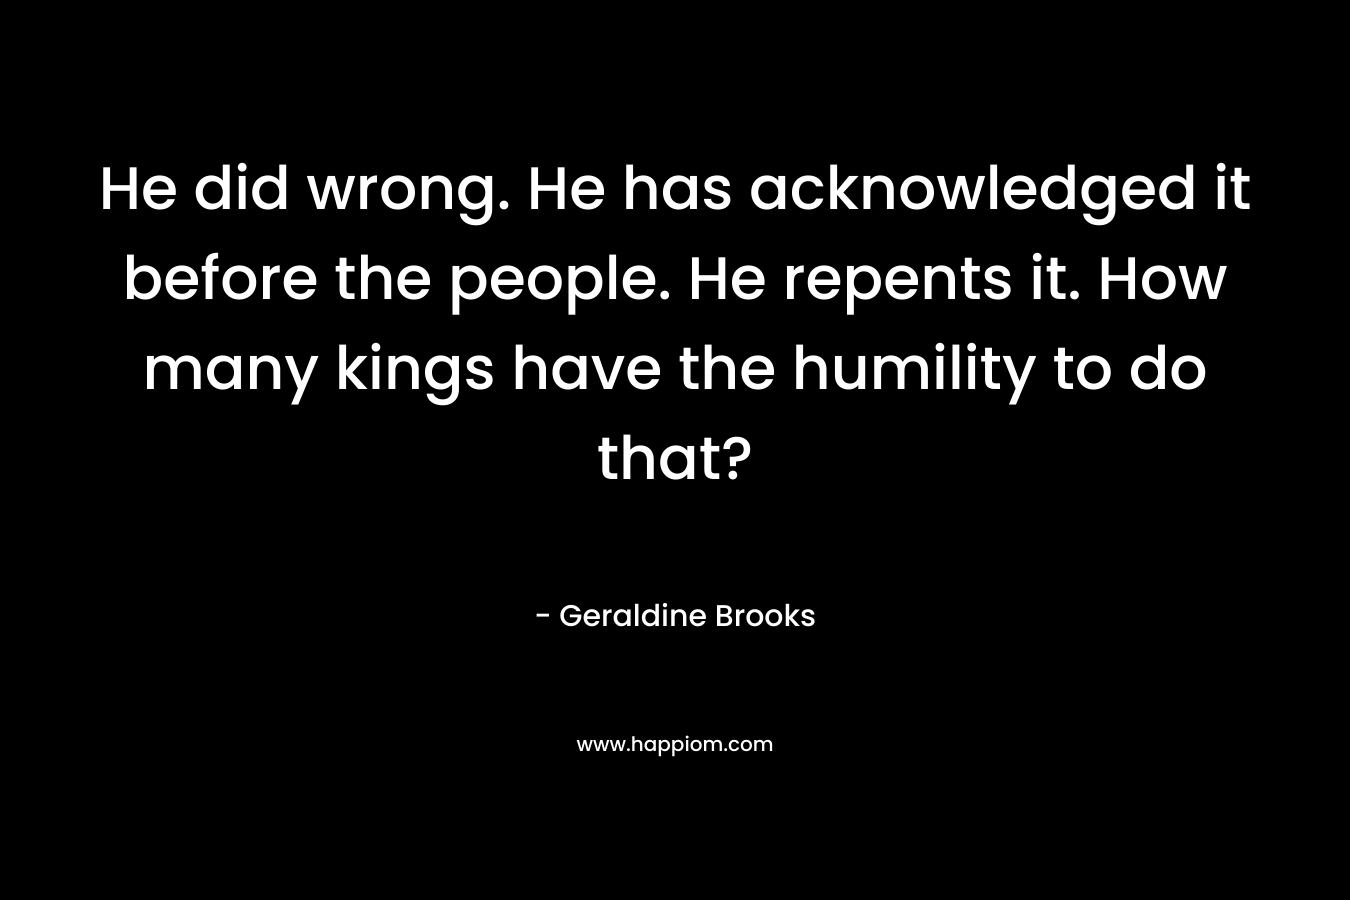 He did wrong. He has acknowledged it before the people. He repents it. How many kings have the humility to do that? – Geraldine Brooks